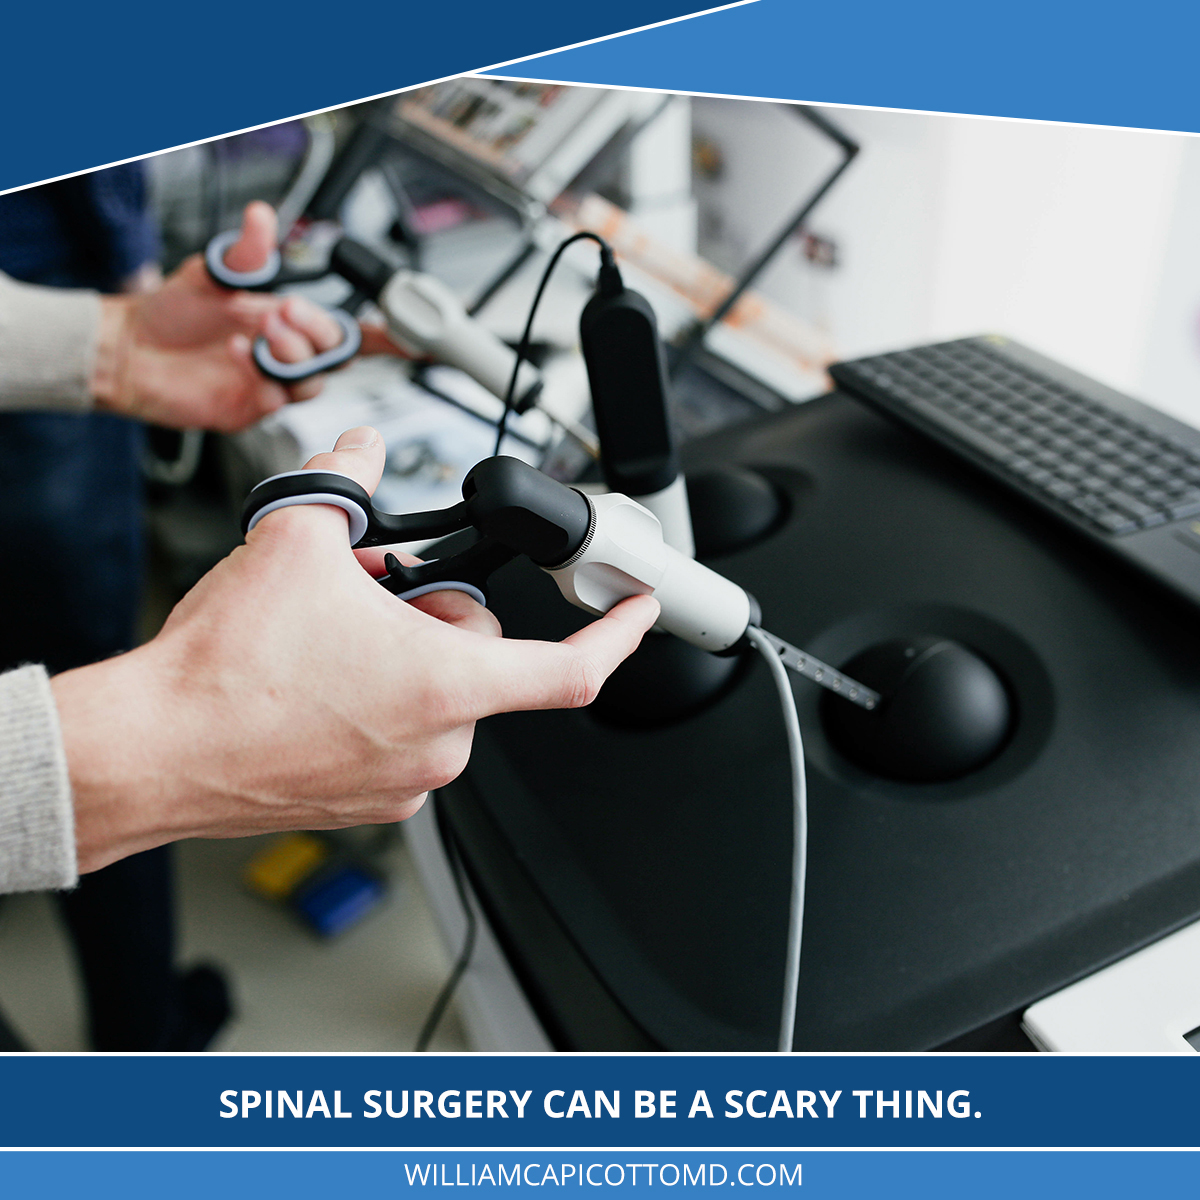 Spinal surgery can be a scary thing